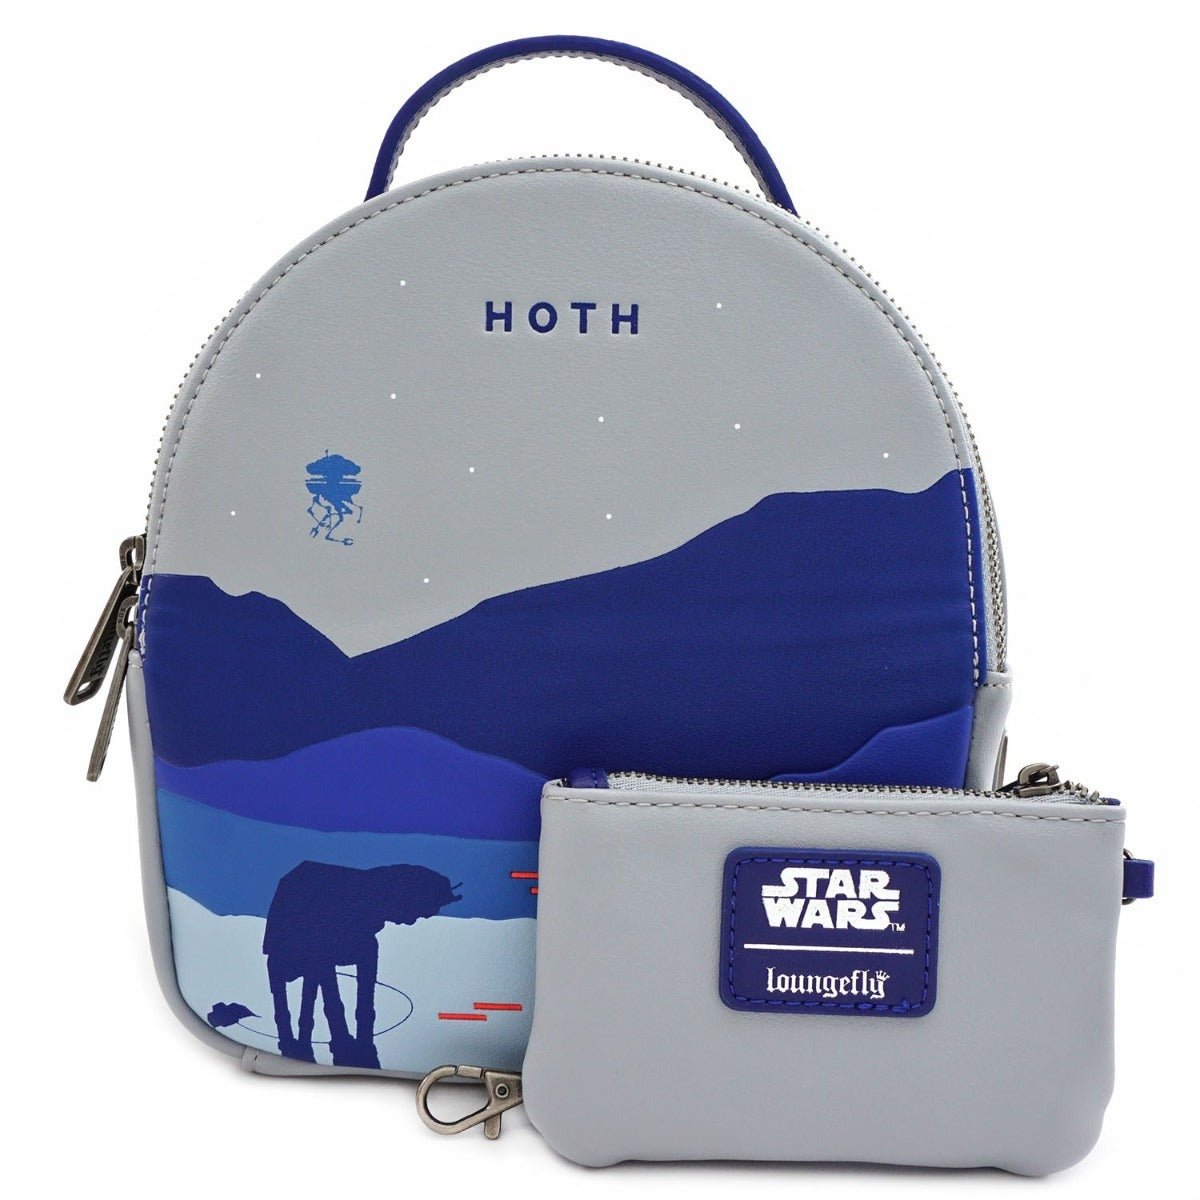 Loungefly x Star Wars Hoth Convertible Backpack Set - GeekCore